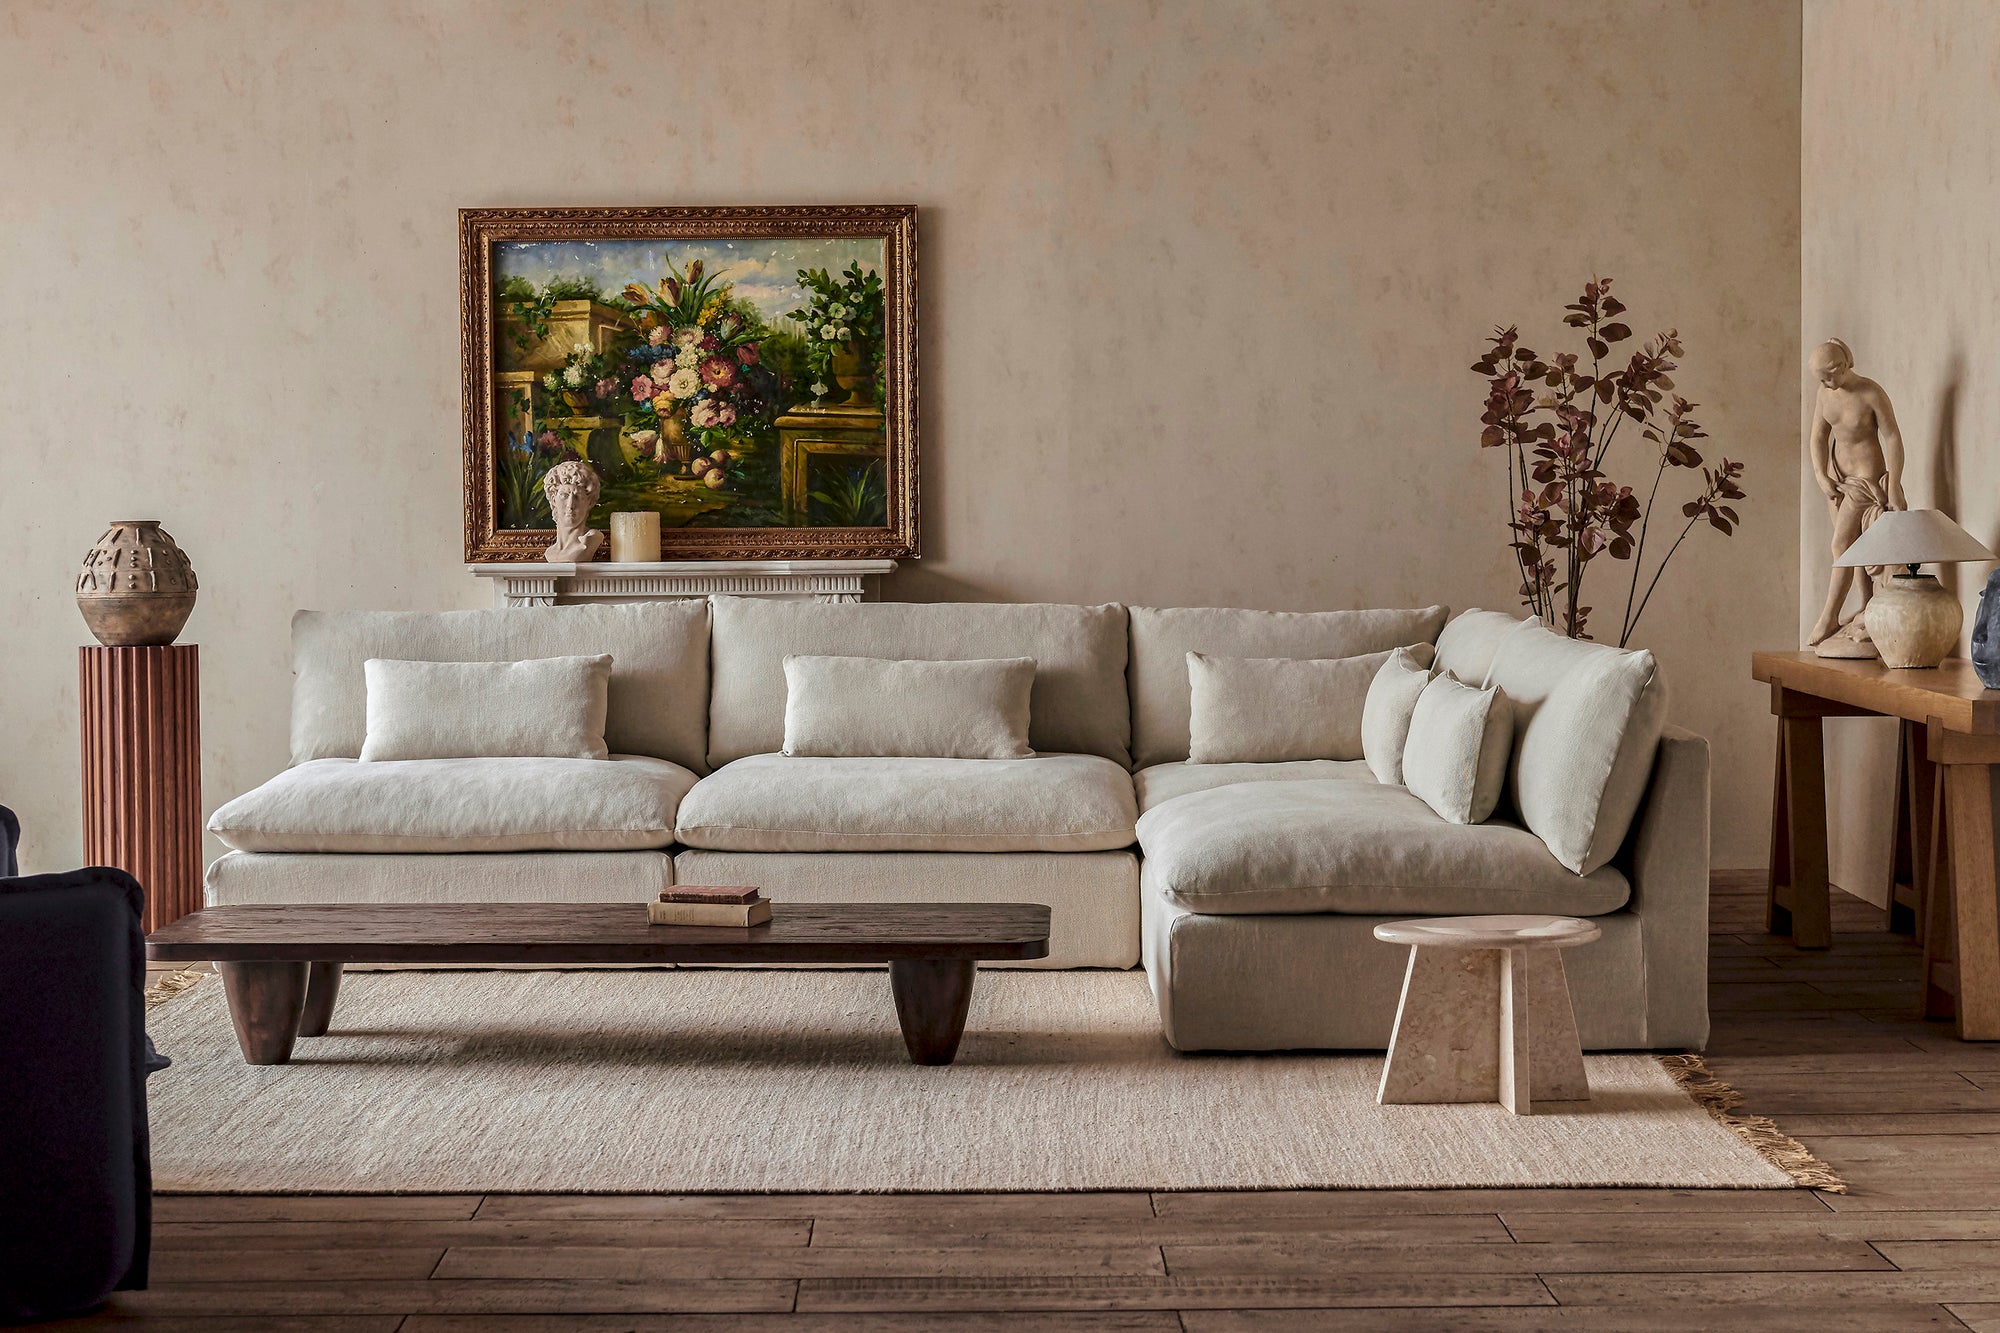 Aria Grande L-Shape Sectional Sofa in Warm Oatmeal, a light warm beige Medium Weight Linen, placed in a decorated room with the Theo Coffee Table